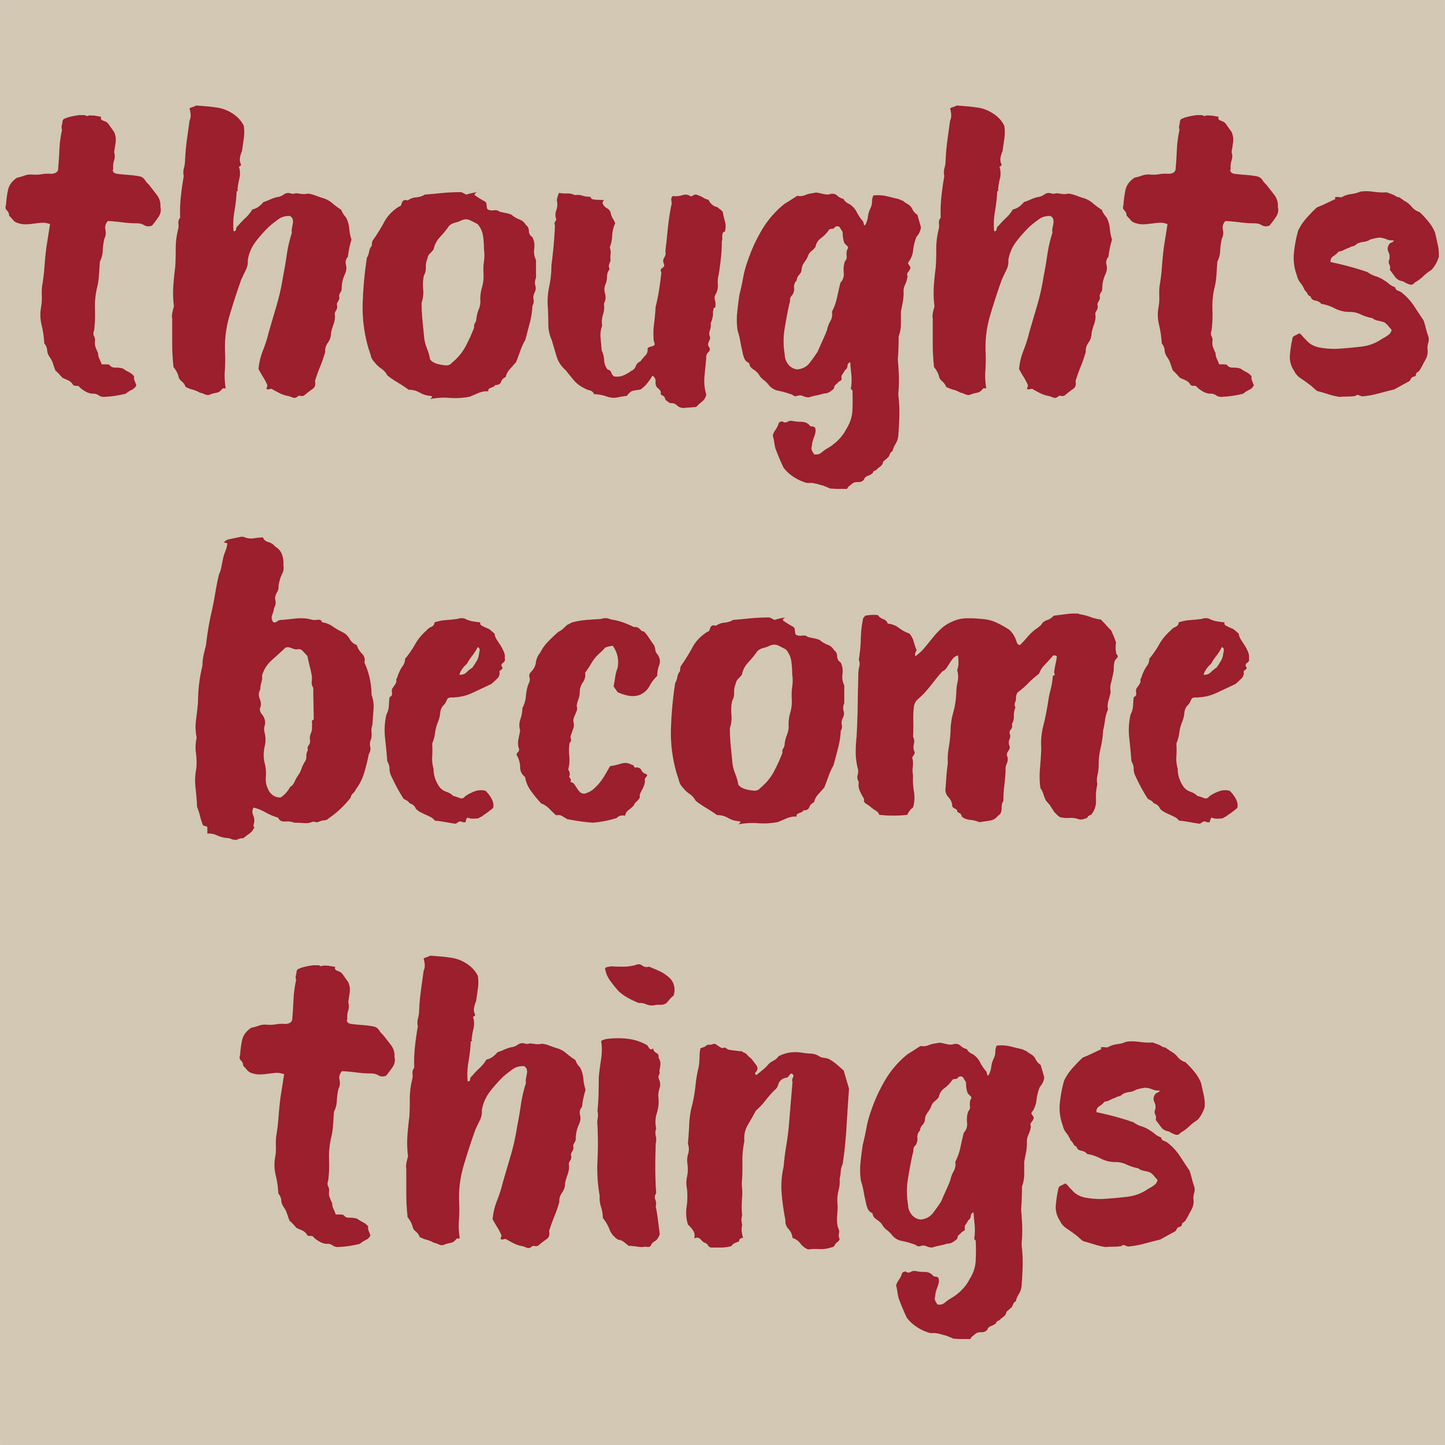 thoughts become things Hoodie